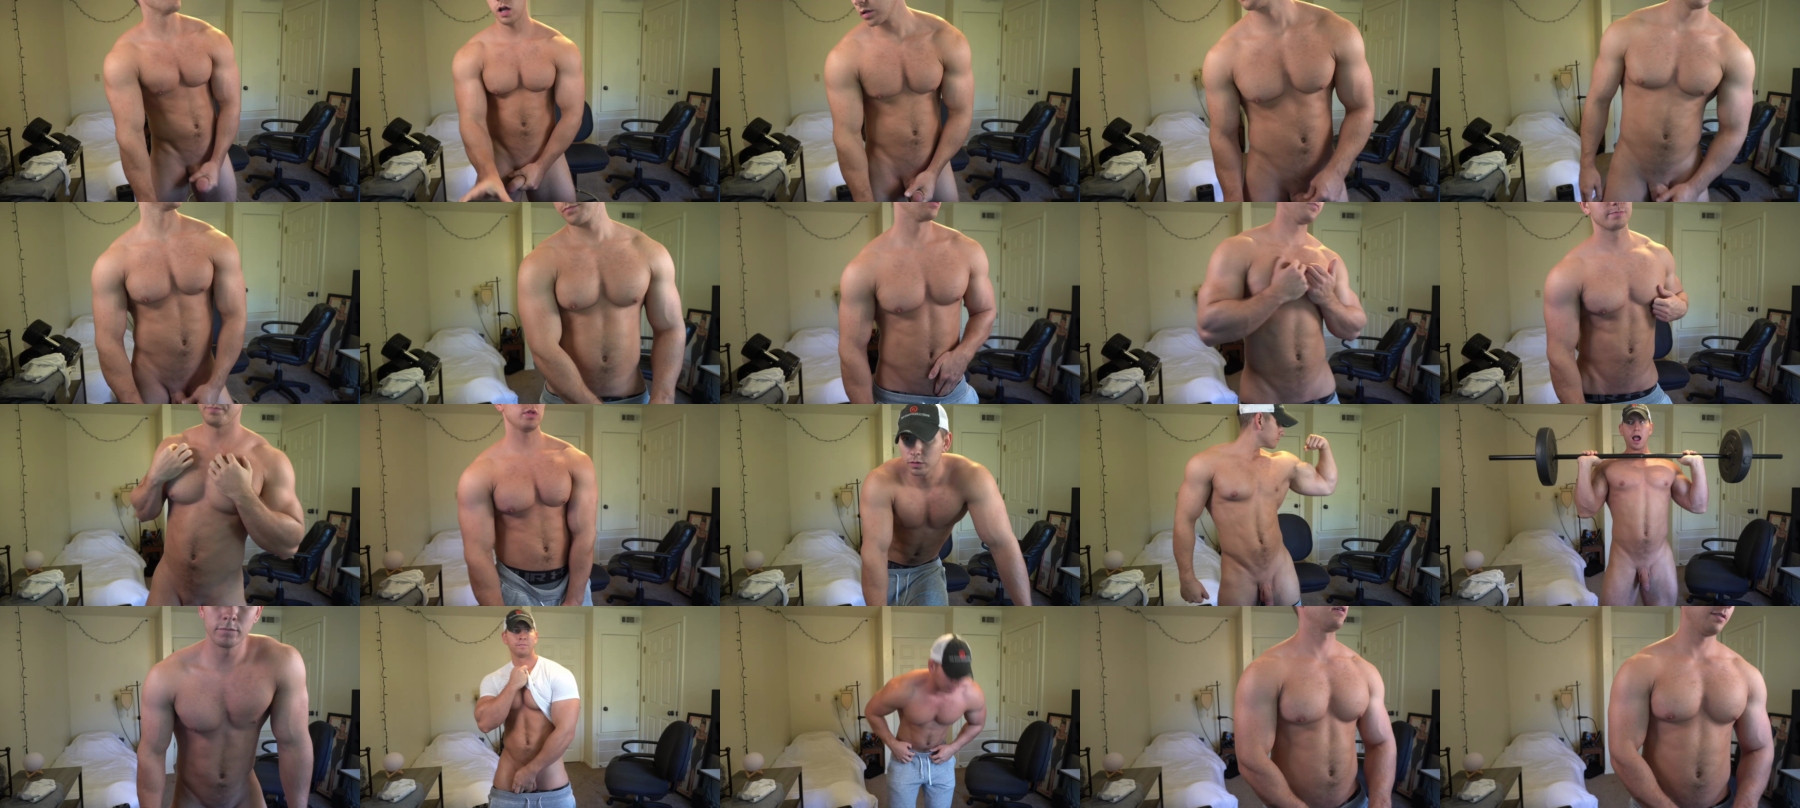 Hotmuscles6t9 Recorded CAM SHOW @ Chaturbate 06-05-2021